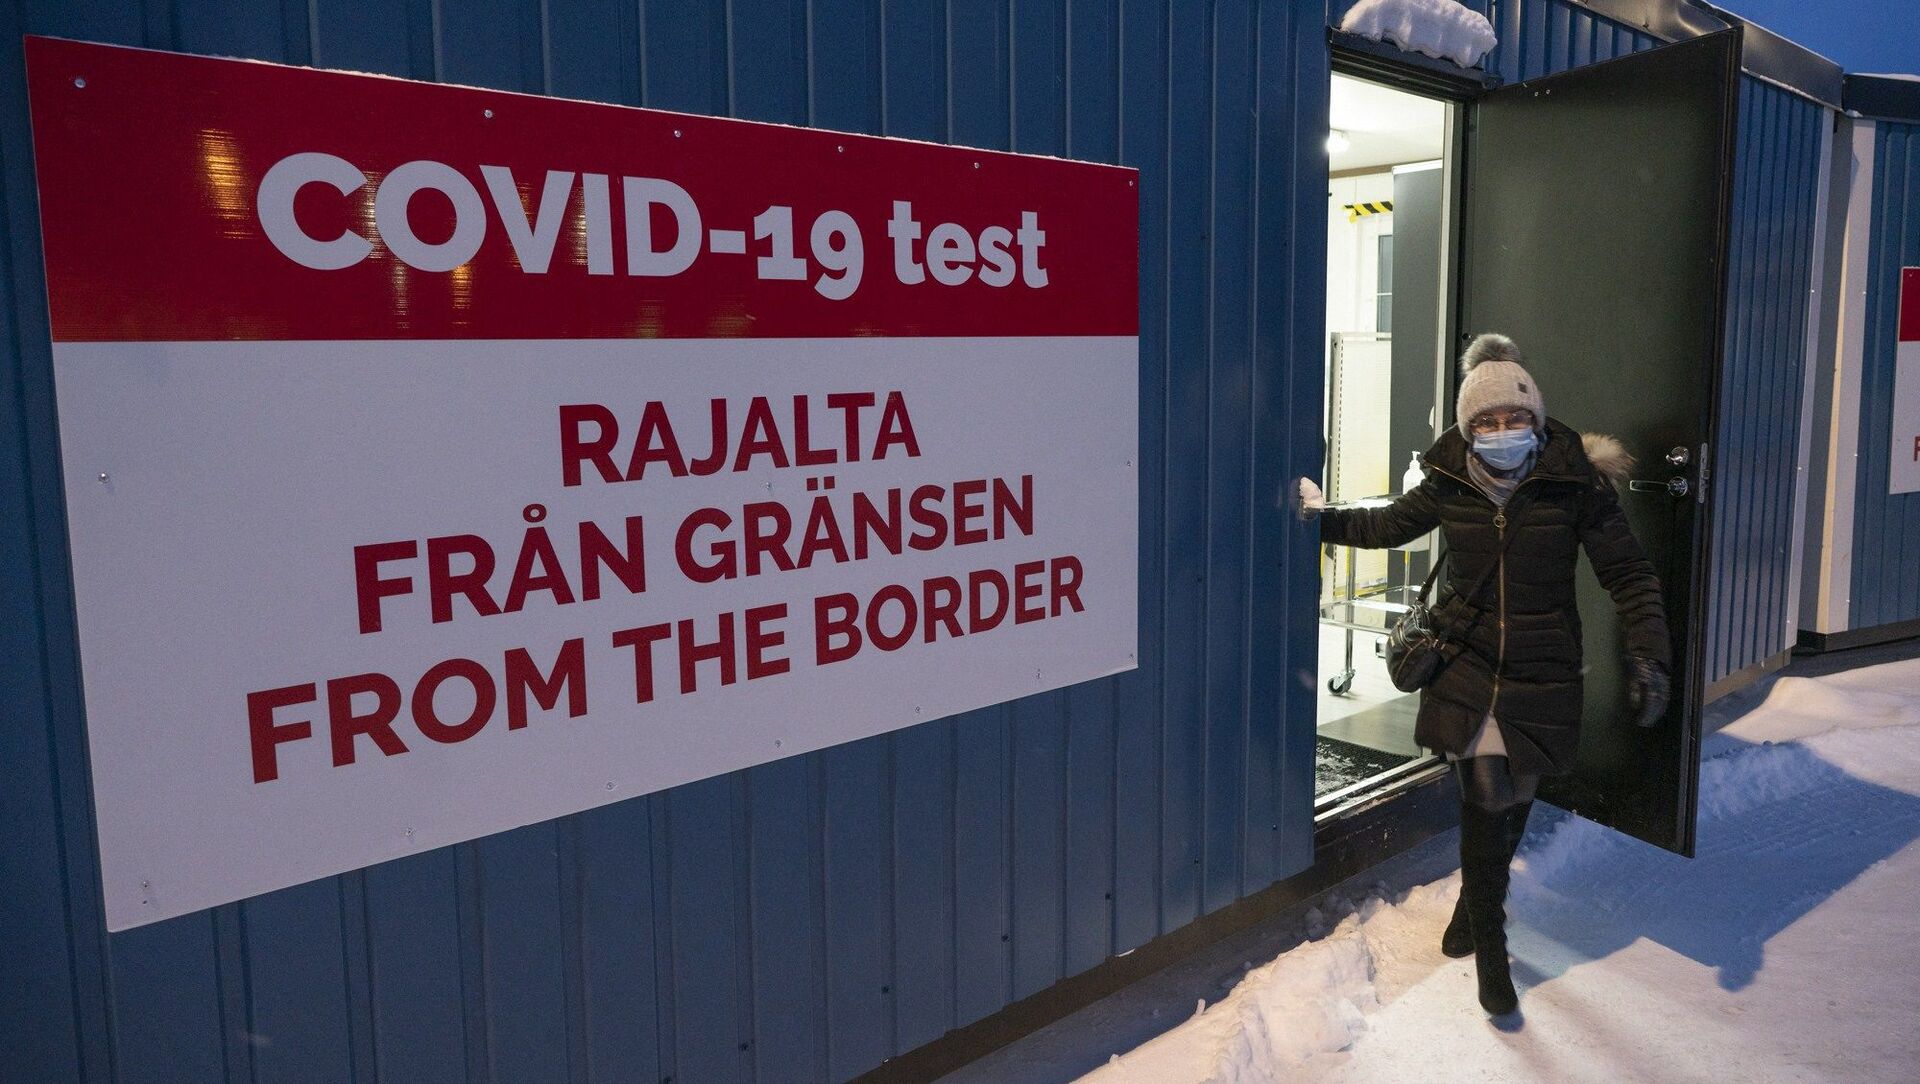 Eija Korolainen-Koivisto leaves after getting her voluntary Covid-19 test at the border at the border between Finland and Sweden in Tornio, Northern Finland on January 27, 2021. - Sputnik International, 1920, 18.02.2021